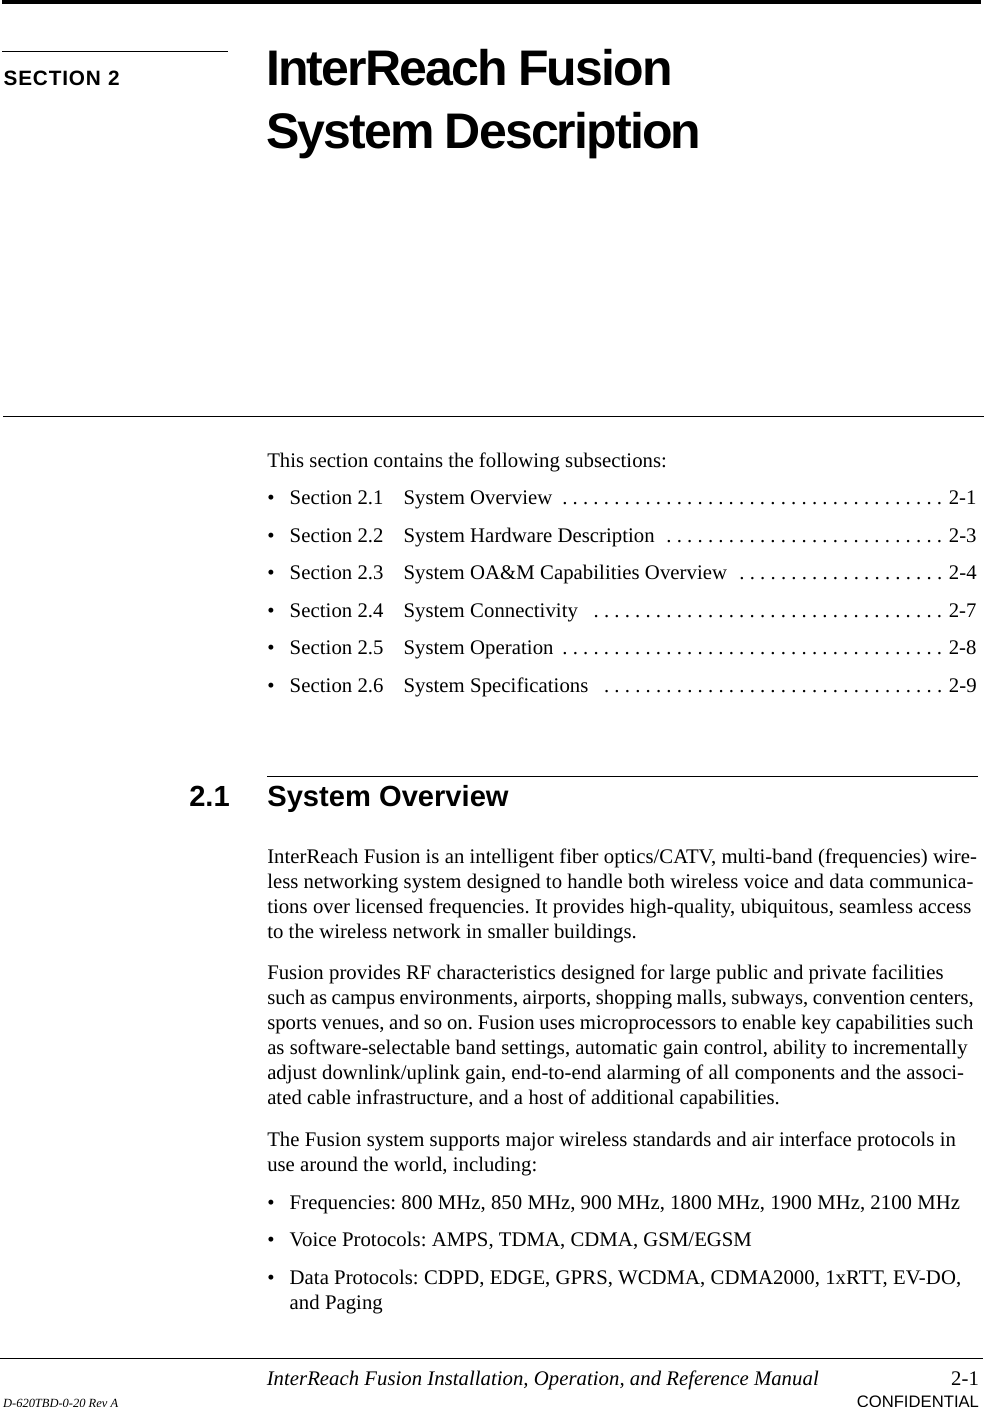 InterReach Fusion Installation, Operation, and Reference Manual 2-1D-620TBD-0-20 Rev A CONFIDENTIALSECTION 2 InterReach Fusion System DescriptionThis section contains the following subsections:• Section 2.1   System Overview  . . . . . . . . . . . . . . . . . . . . . . . . . . . . . . . . . . . . . 2-1• Section 2.2   System Hardware Description  . . . . . . . . . . . . . . . . . . . . . . . . . . . 2-3• Section 2.3   System OA&amp;M Capabilities Overview  . . . . . . . . . . . . . . . . . . . . 2-4• Section 2.4   System Connectivity   . . . . . . . . . . . . . . . . . . . . . . . . . . . . . . . . . . 2-7• Section 2.5   System Operation  . . . . . . . . . . . . . . . . . . . . . . . . . . . . . . . . . . . . . 2-8• Section 2.6   System Specifications   . . . . . . . . . . . . . . . . . . . . . . . . . . . . . . . . . 2-92.1 System OverviewInterReach Fusion is an intelligent fiber optics/CATV, multi-band (frequencies) wire-less networking system designed to handle both wireless voice and data communica-tions over licensed frequencies. It provides high-quality, ubiquitous, seamless access to the wireless network in smaller buildings.Fusion provides RF characteristics designed for large public and private facilities such as campus environments, airports, shopping malls, subways, convention centers, sports venues, and so on. Fusion uses microprocessors to enable key capabilities such as software-selectable band settings, automatic gain control, ability to incrementally adjust downlink/uplink gain, end-to-end alarming of all components and the associ-ated cable infrastructure, and a host of additional capabilities.The Fusion system supports major wireless standards and air interface protocols in use around the world, including:• Frequencies: 800 MHz, 850 MHz, 900 MHz, 1800 MHz, 1900 MHz, 2100 MHz• Voice Protocols: AMPS, TDMA, CDMA, GSM/EGSM• Data Protocols: CDPD, EDGE, GPRS, WCDMA, CDMA2000, 1xRTT, EV-DO, and Paging